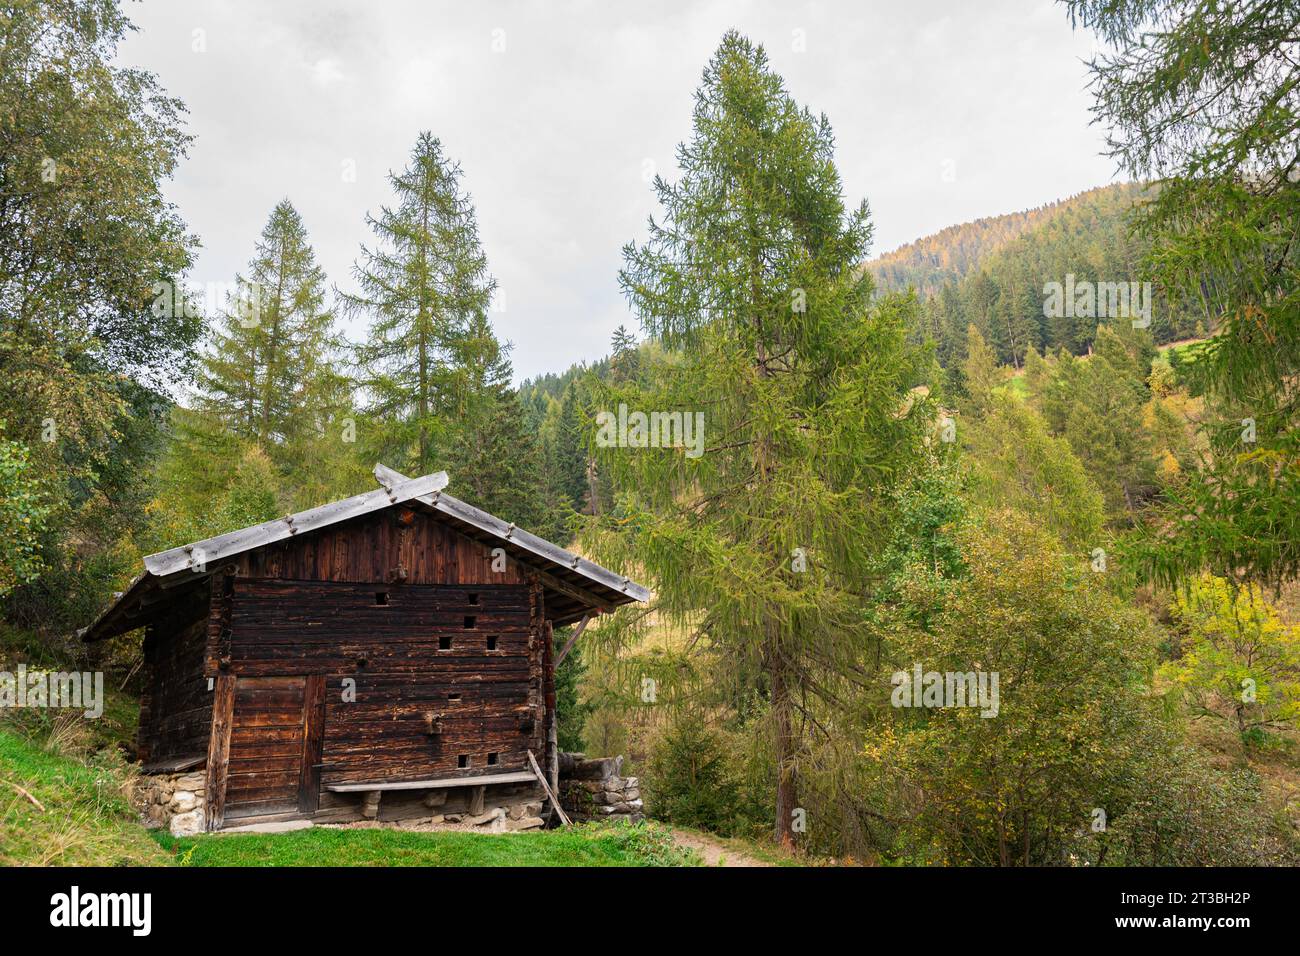 Wooden cottage in the forests in Puster valley, South Tyrol, Italy. Stock Photo